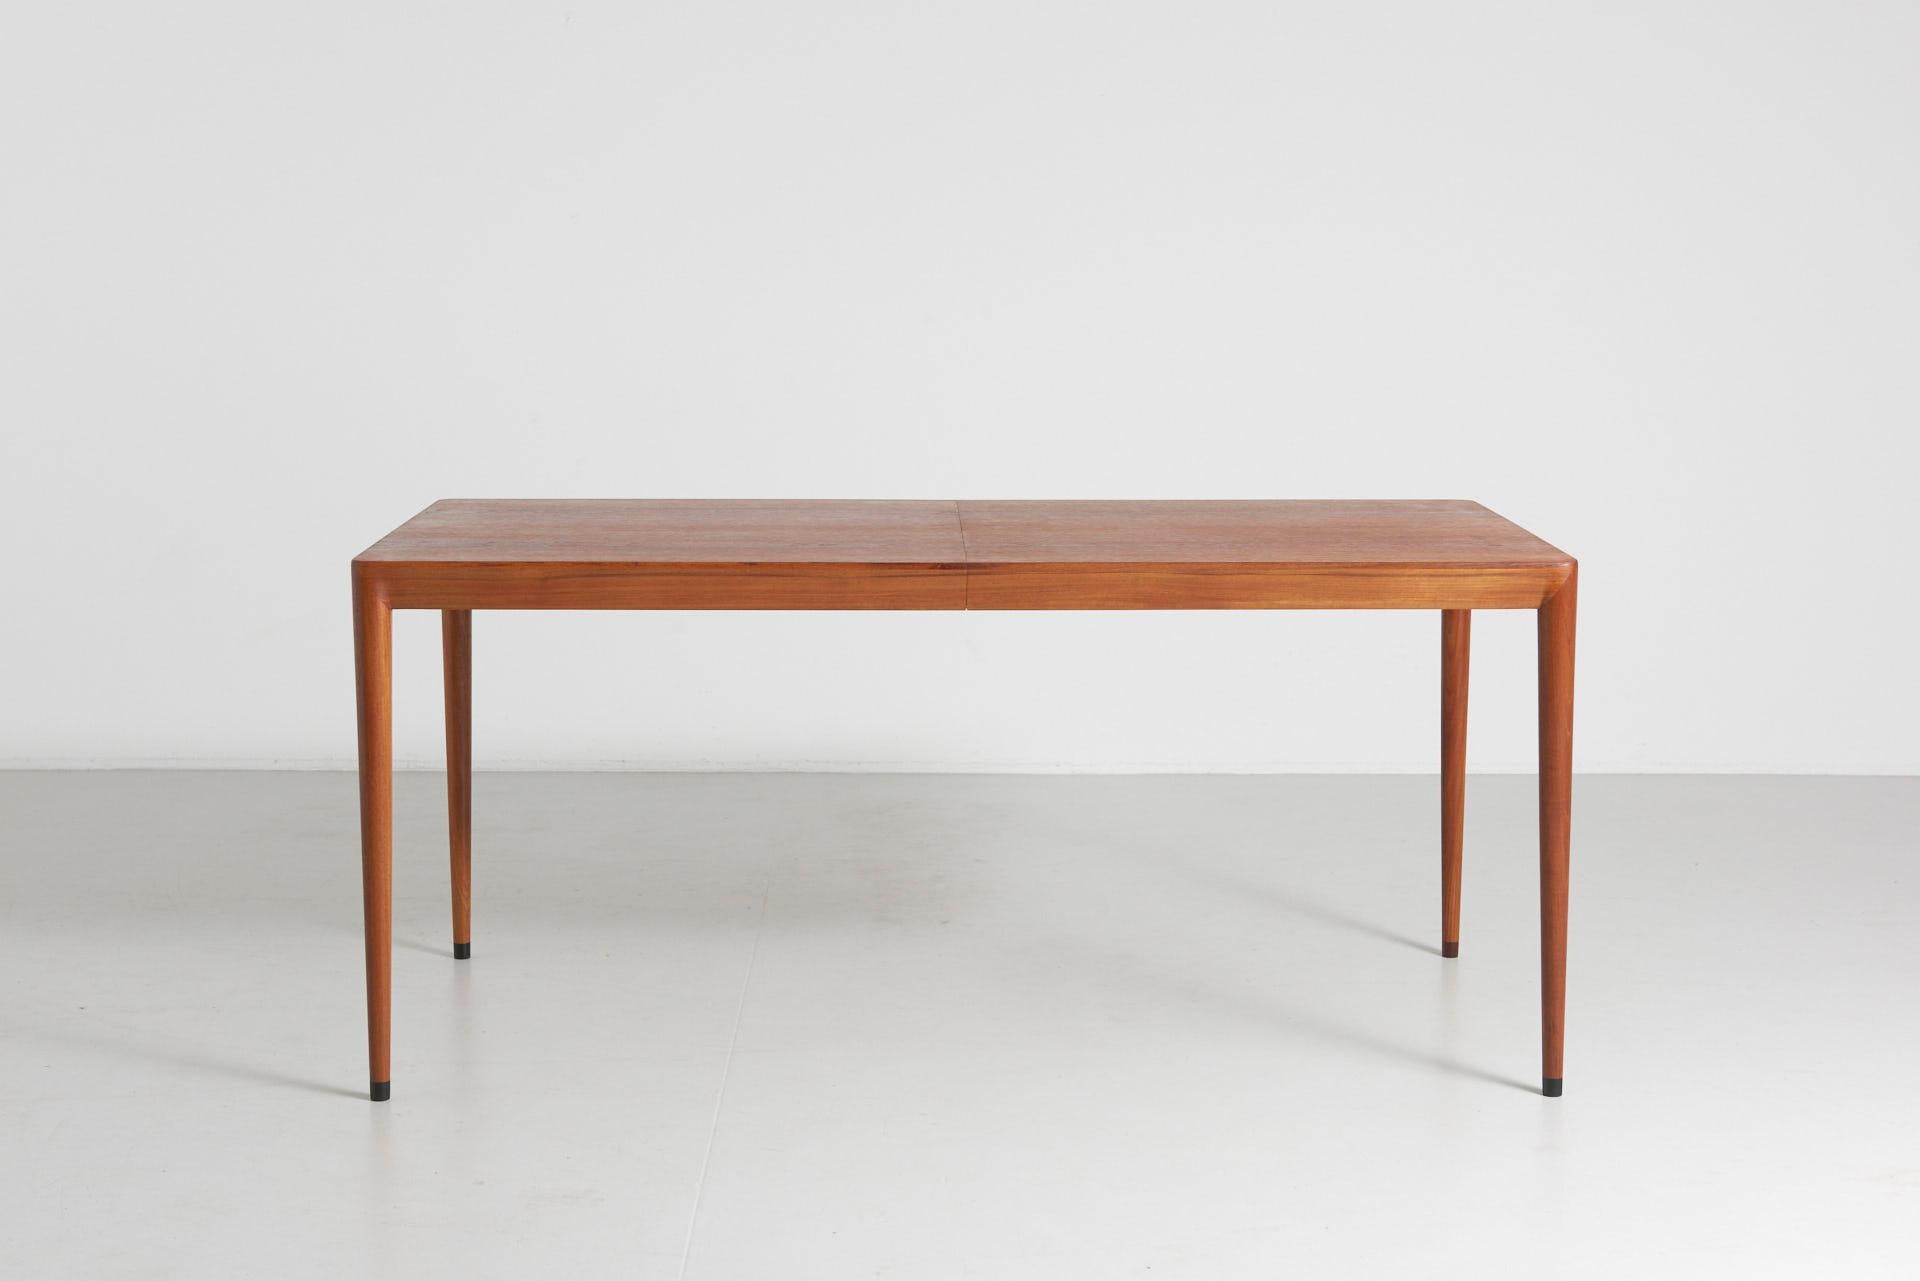 Extendable teak dining table, designed by Severin Hansen and manufactured by Haslev Møbelsnedkeri in Denmark, 1960s. Remarkable wood joints and elegant details.
Measures: Extendable panel 50 cm.